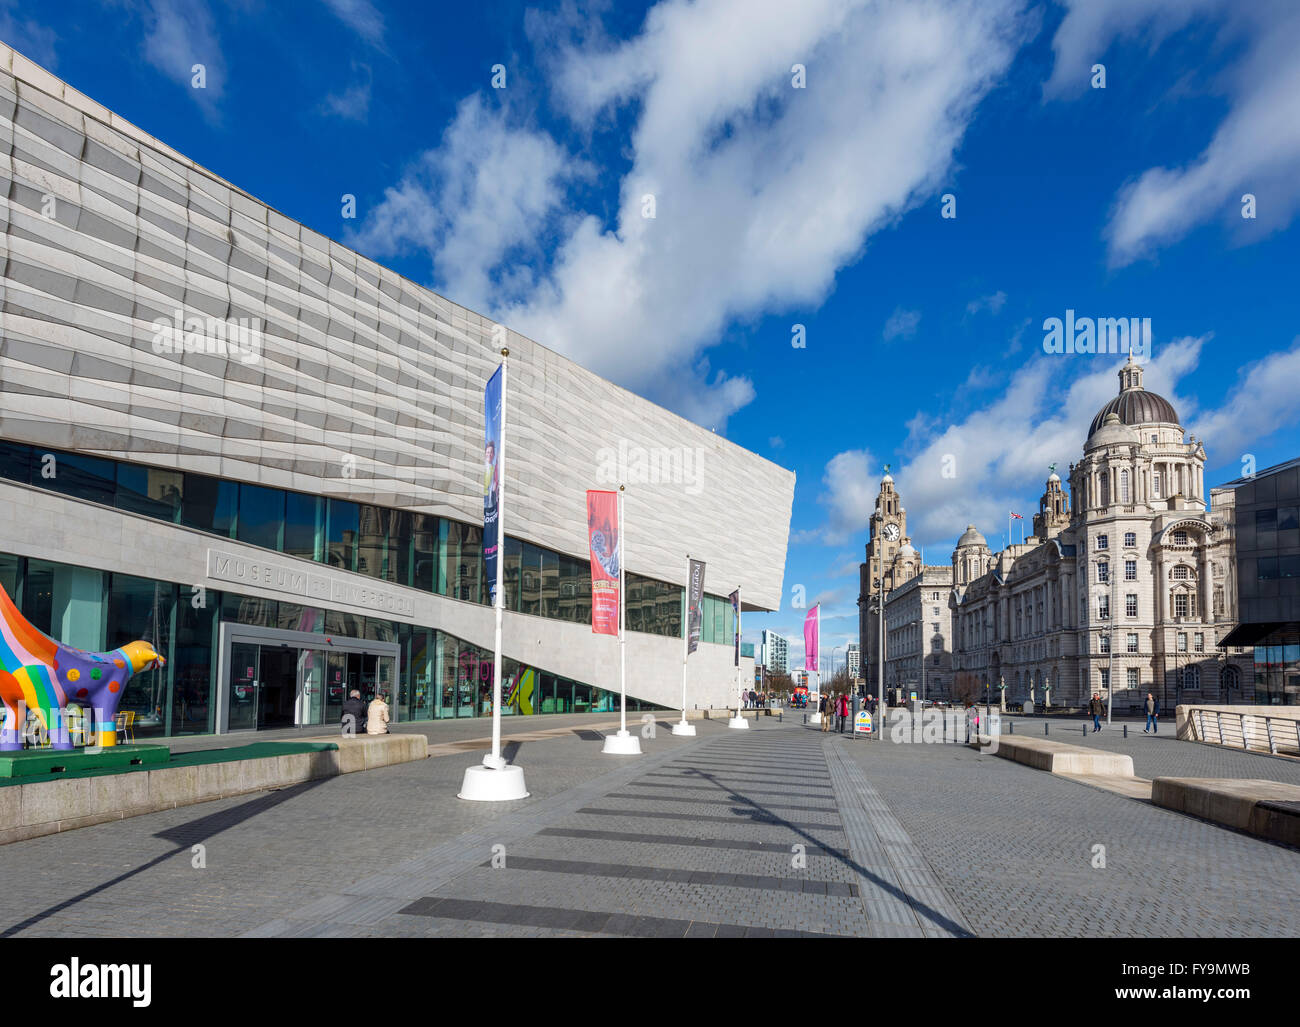 Entrance to the Museum of Liverpool with the Three Graces behind, Pier Head, Liverpool, Merseyside, England, UK Stock Photo